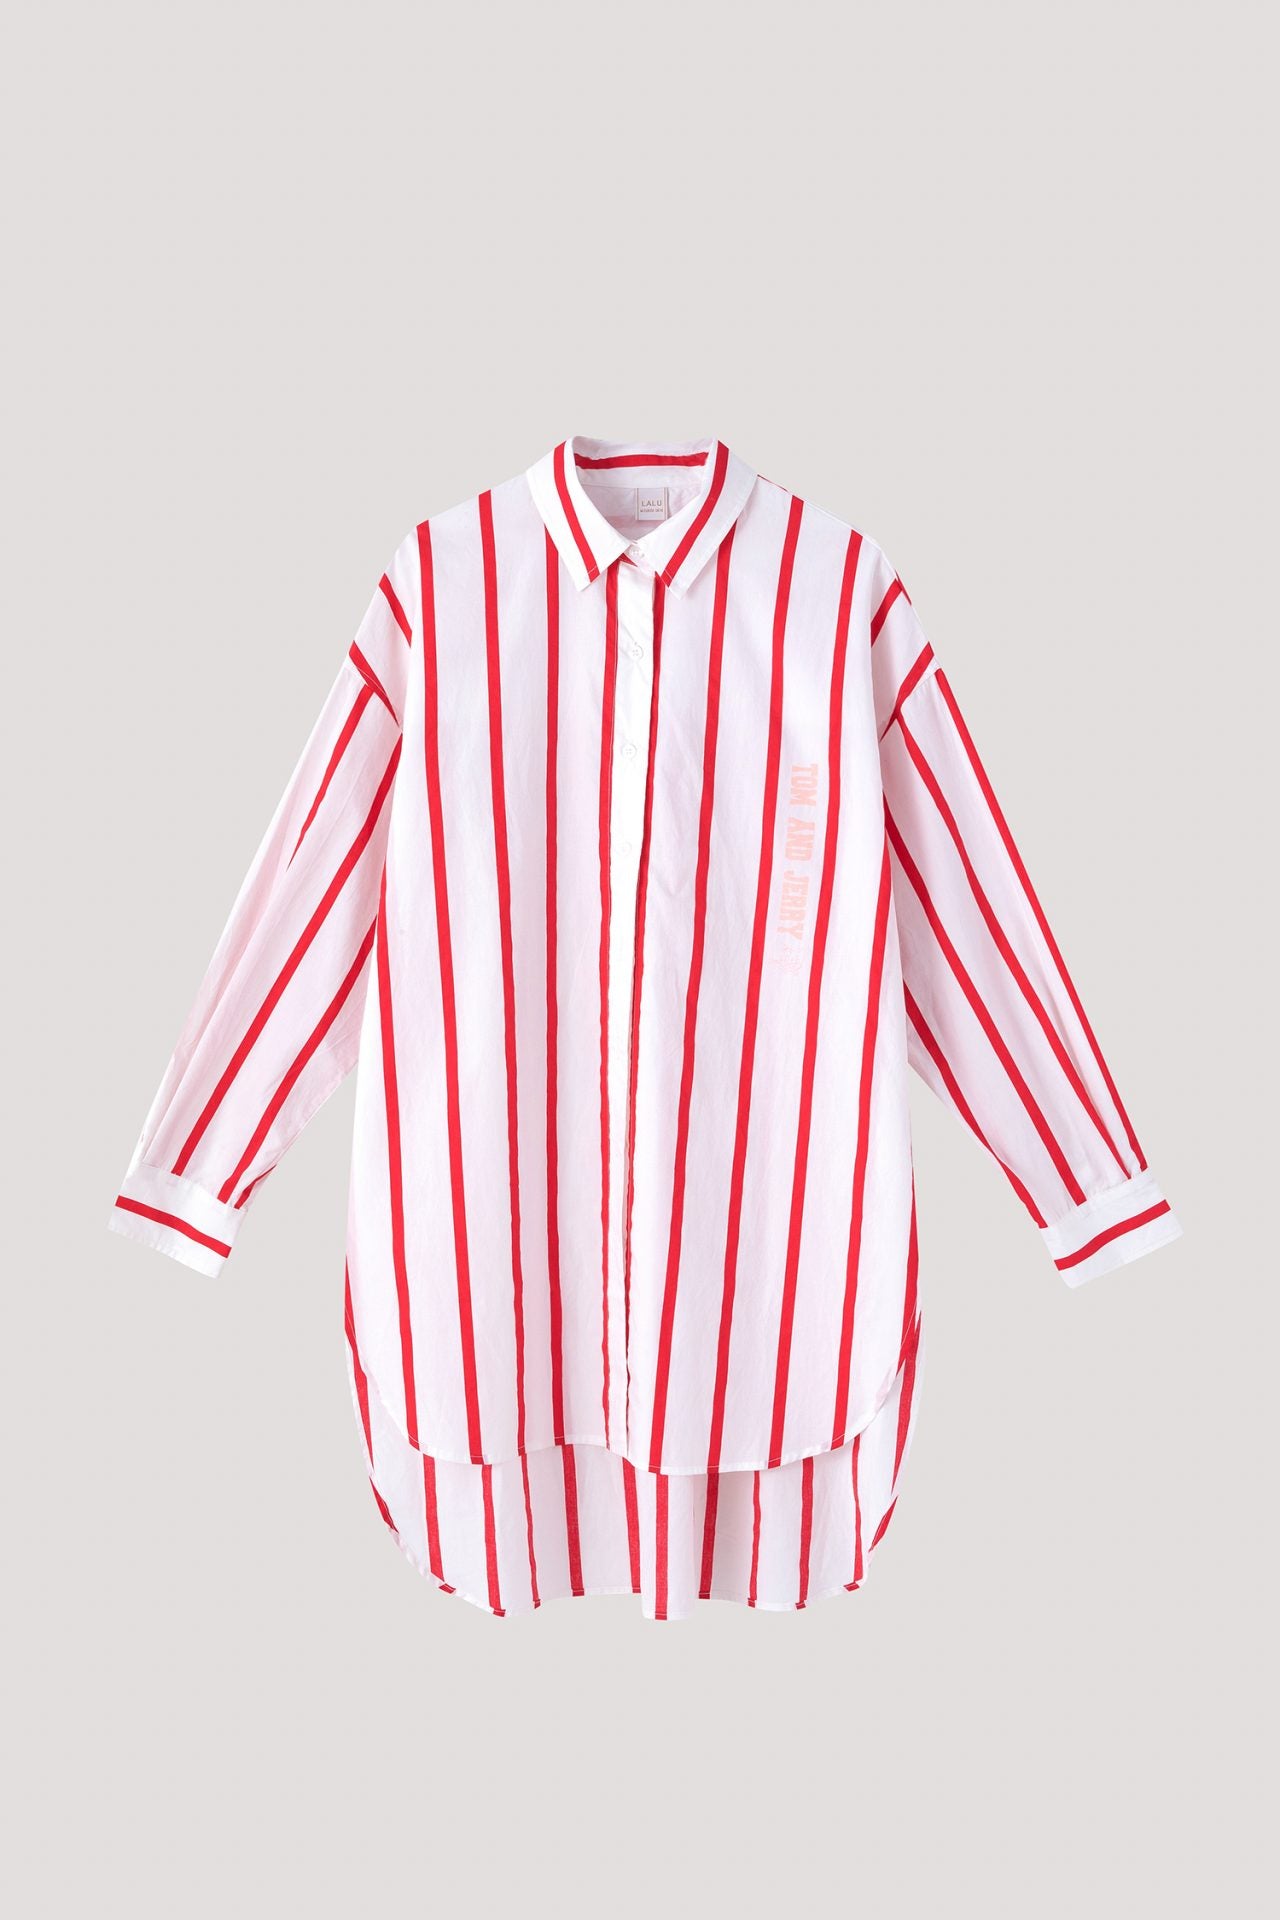 BBL 11658 OVERSIZED LOGO STRIPED BUTTON DOWN TOP RED STRIPES (1)